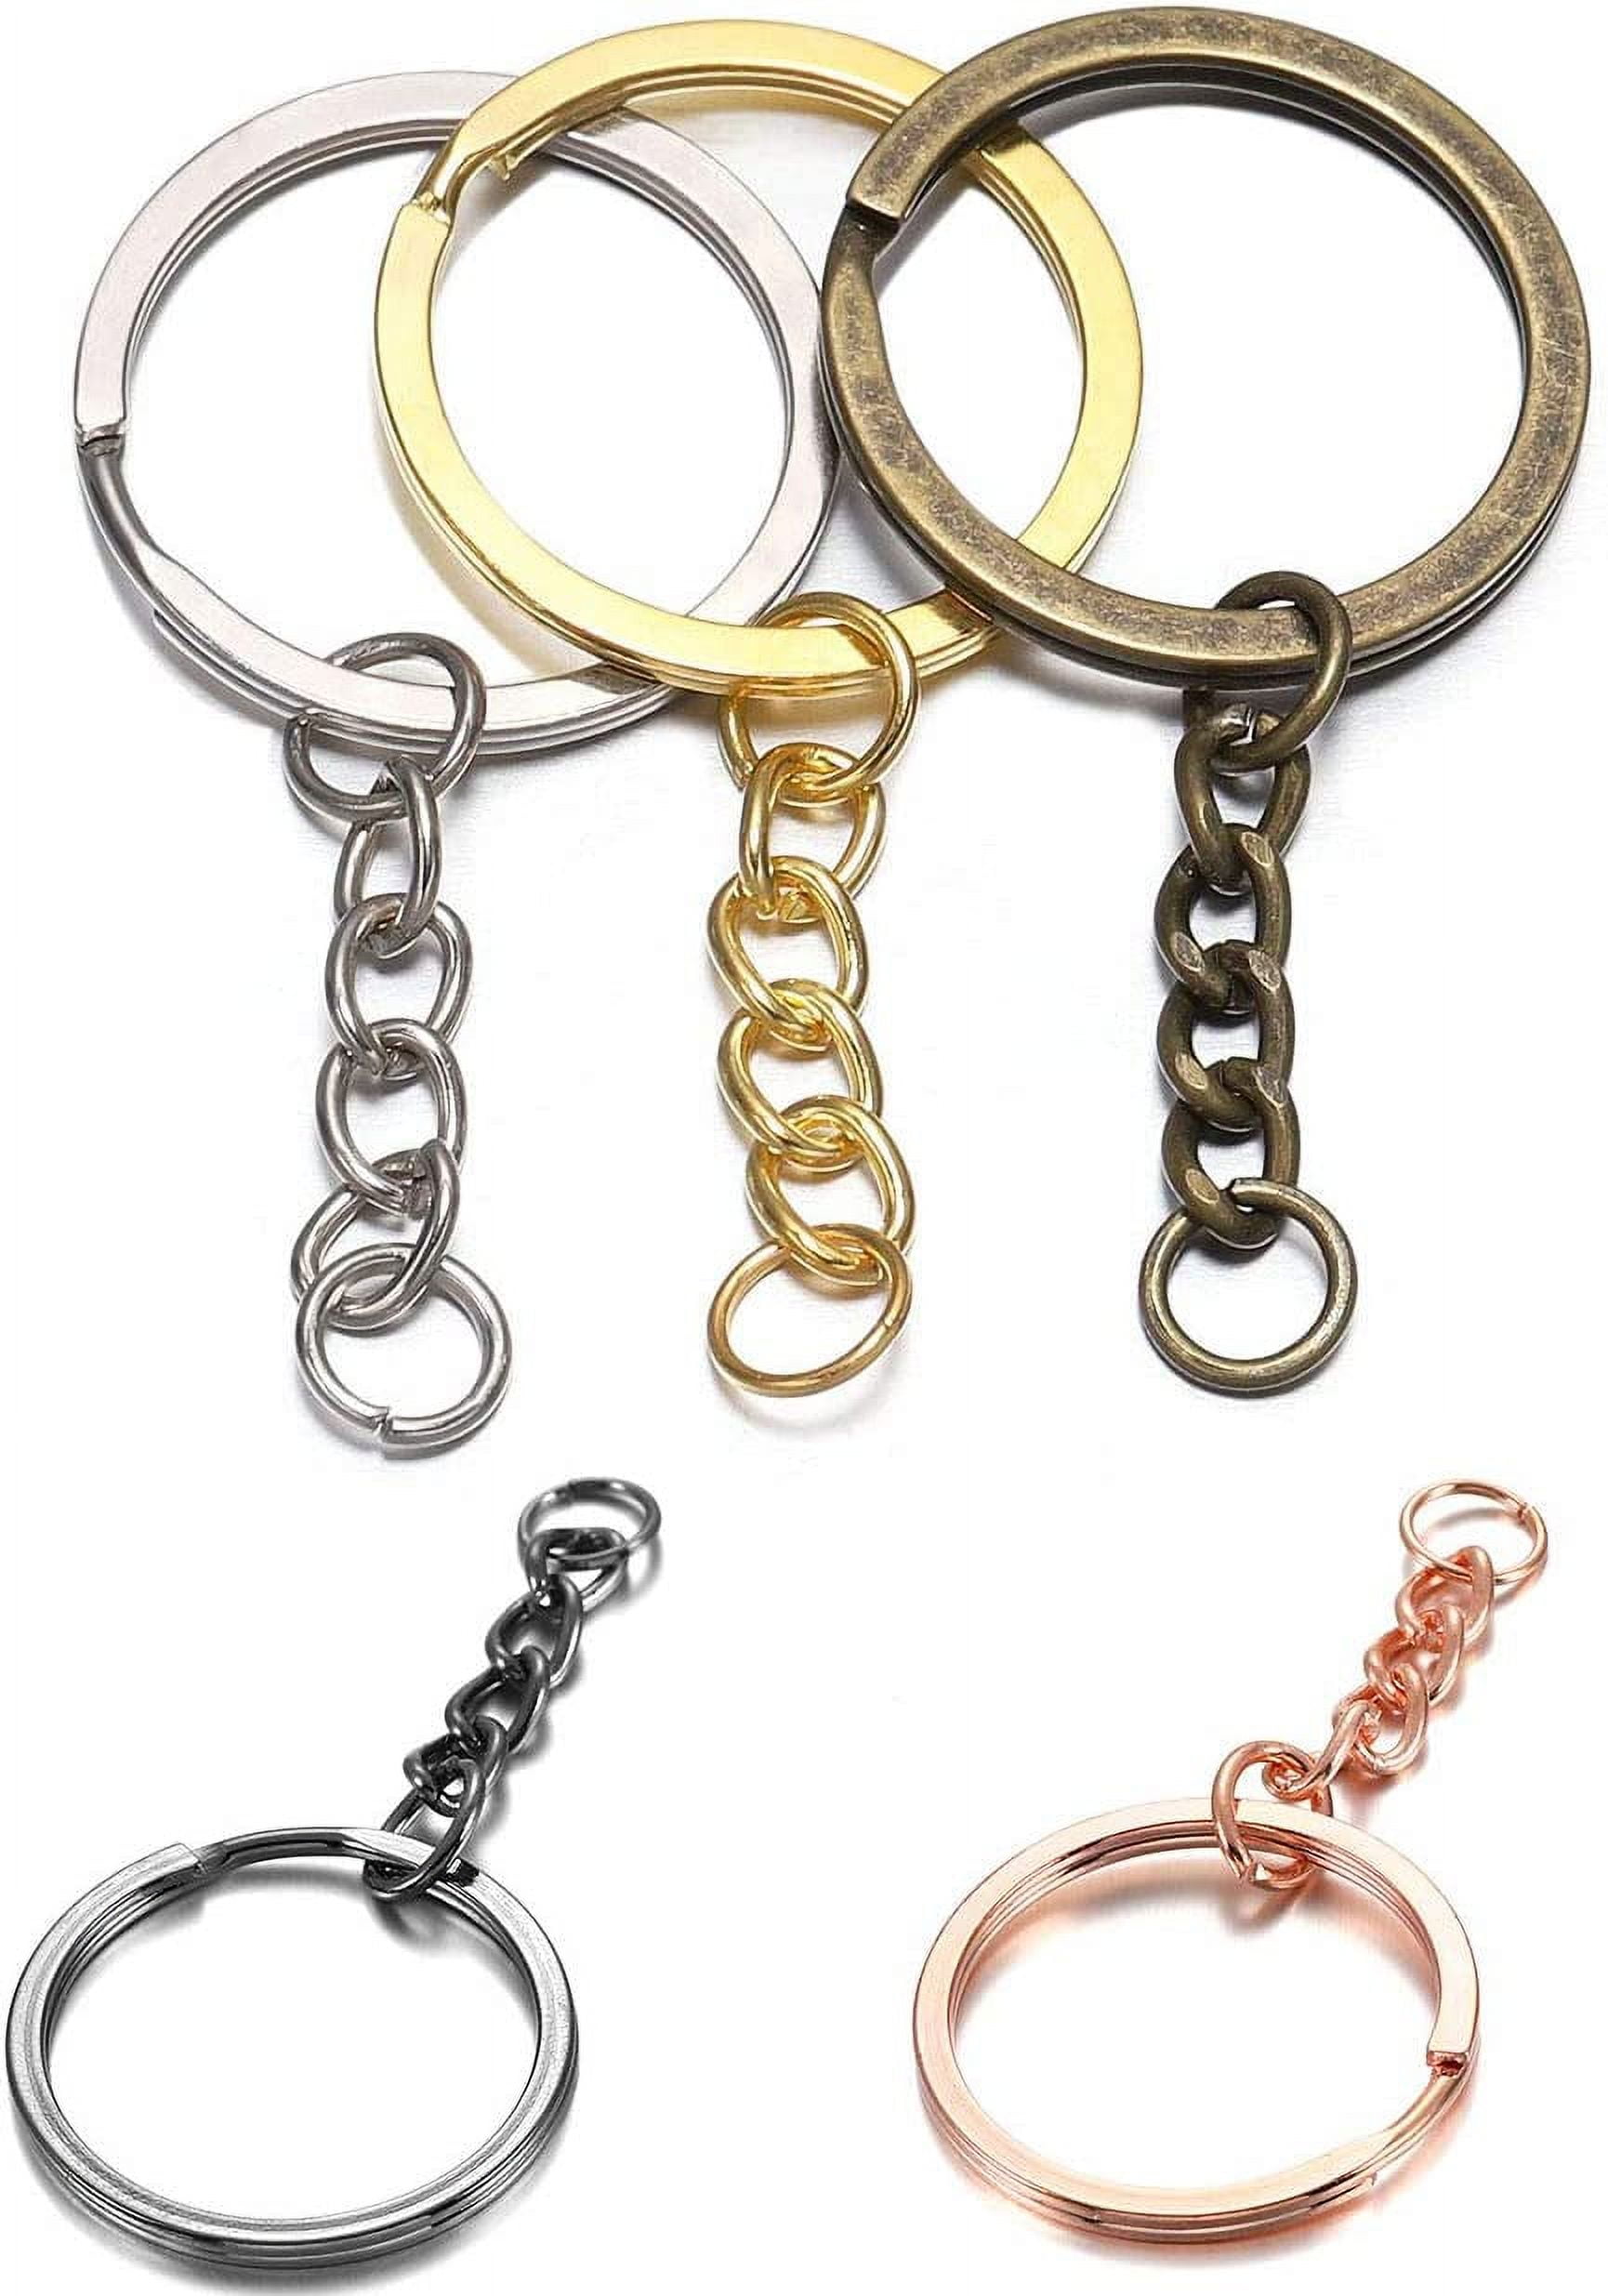 10pcs/lot Flat Key Chain Key Ring Keychain With Lobster Clasps Long Round  Split Keyrings Keychain For Jewelry Making Findings